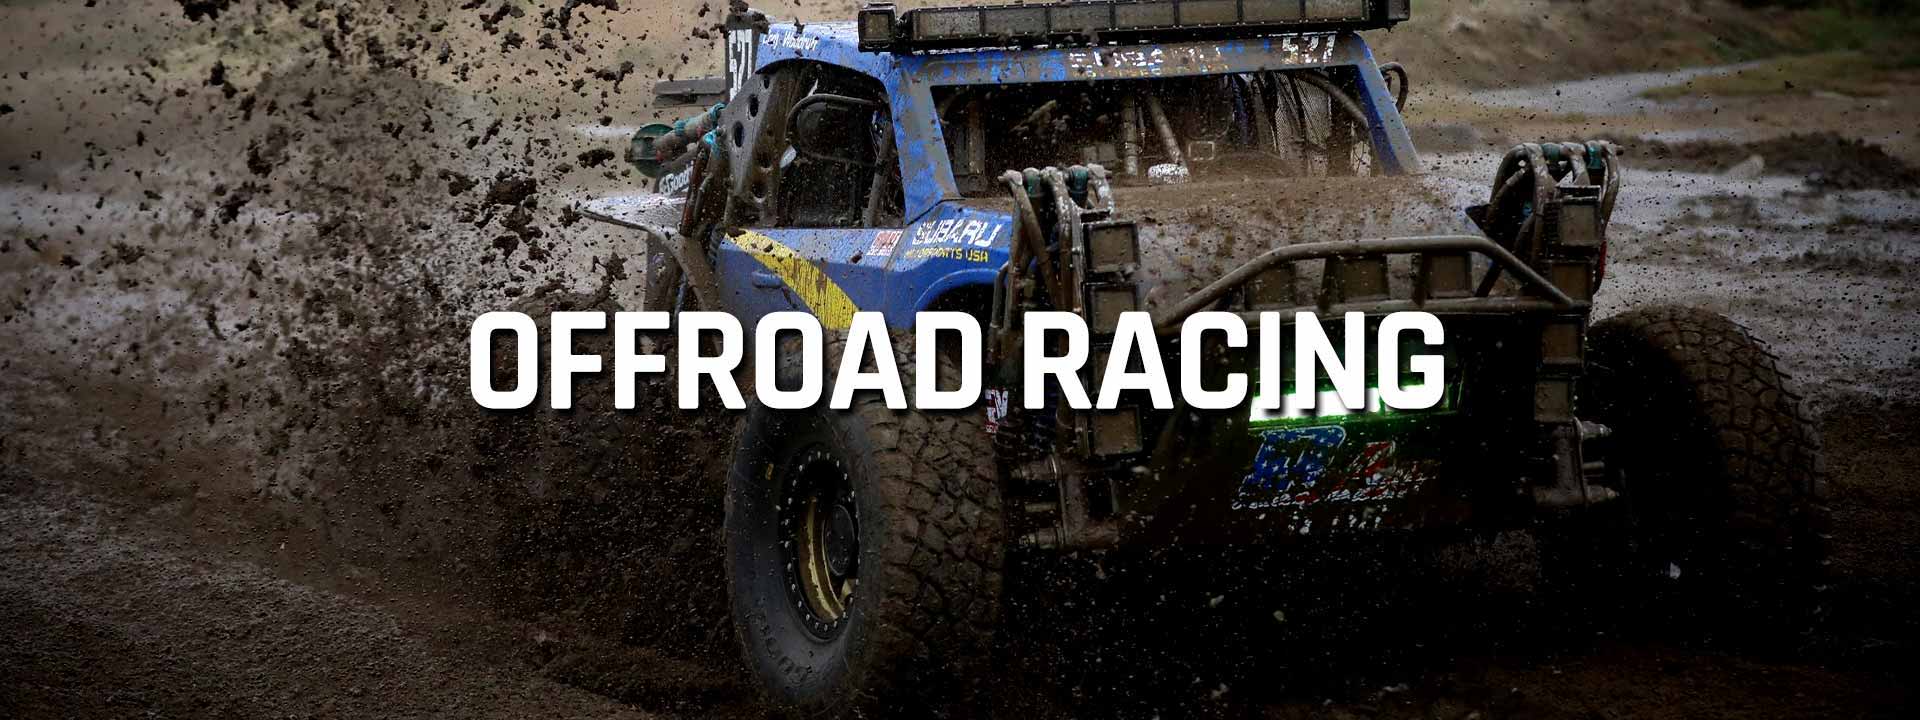 offroad racing communications